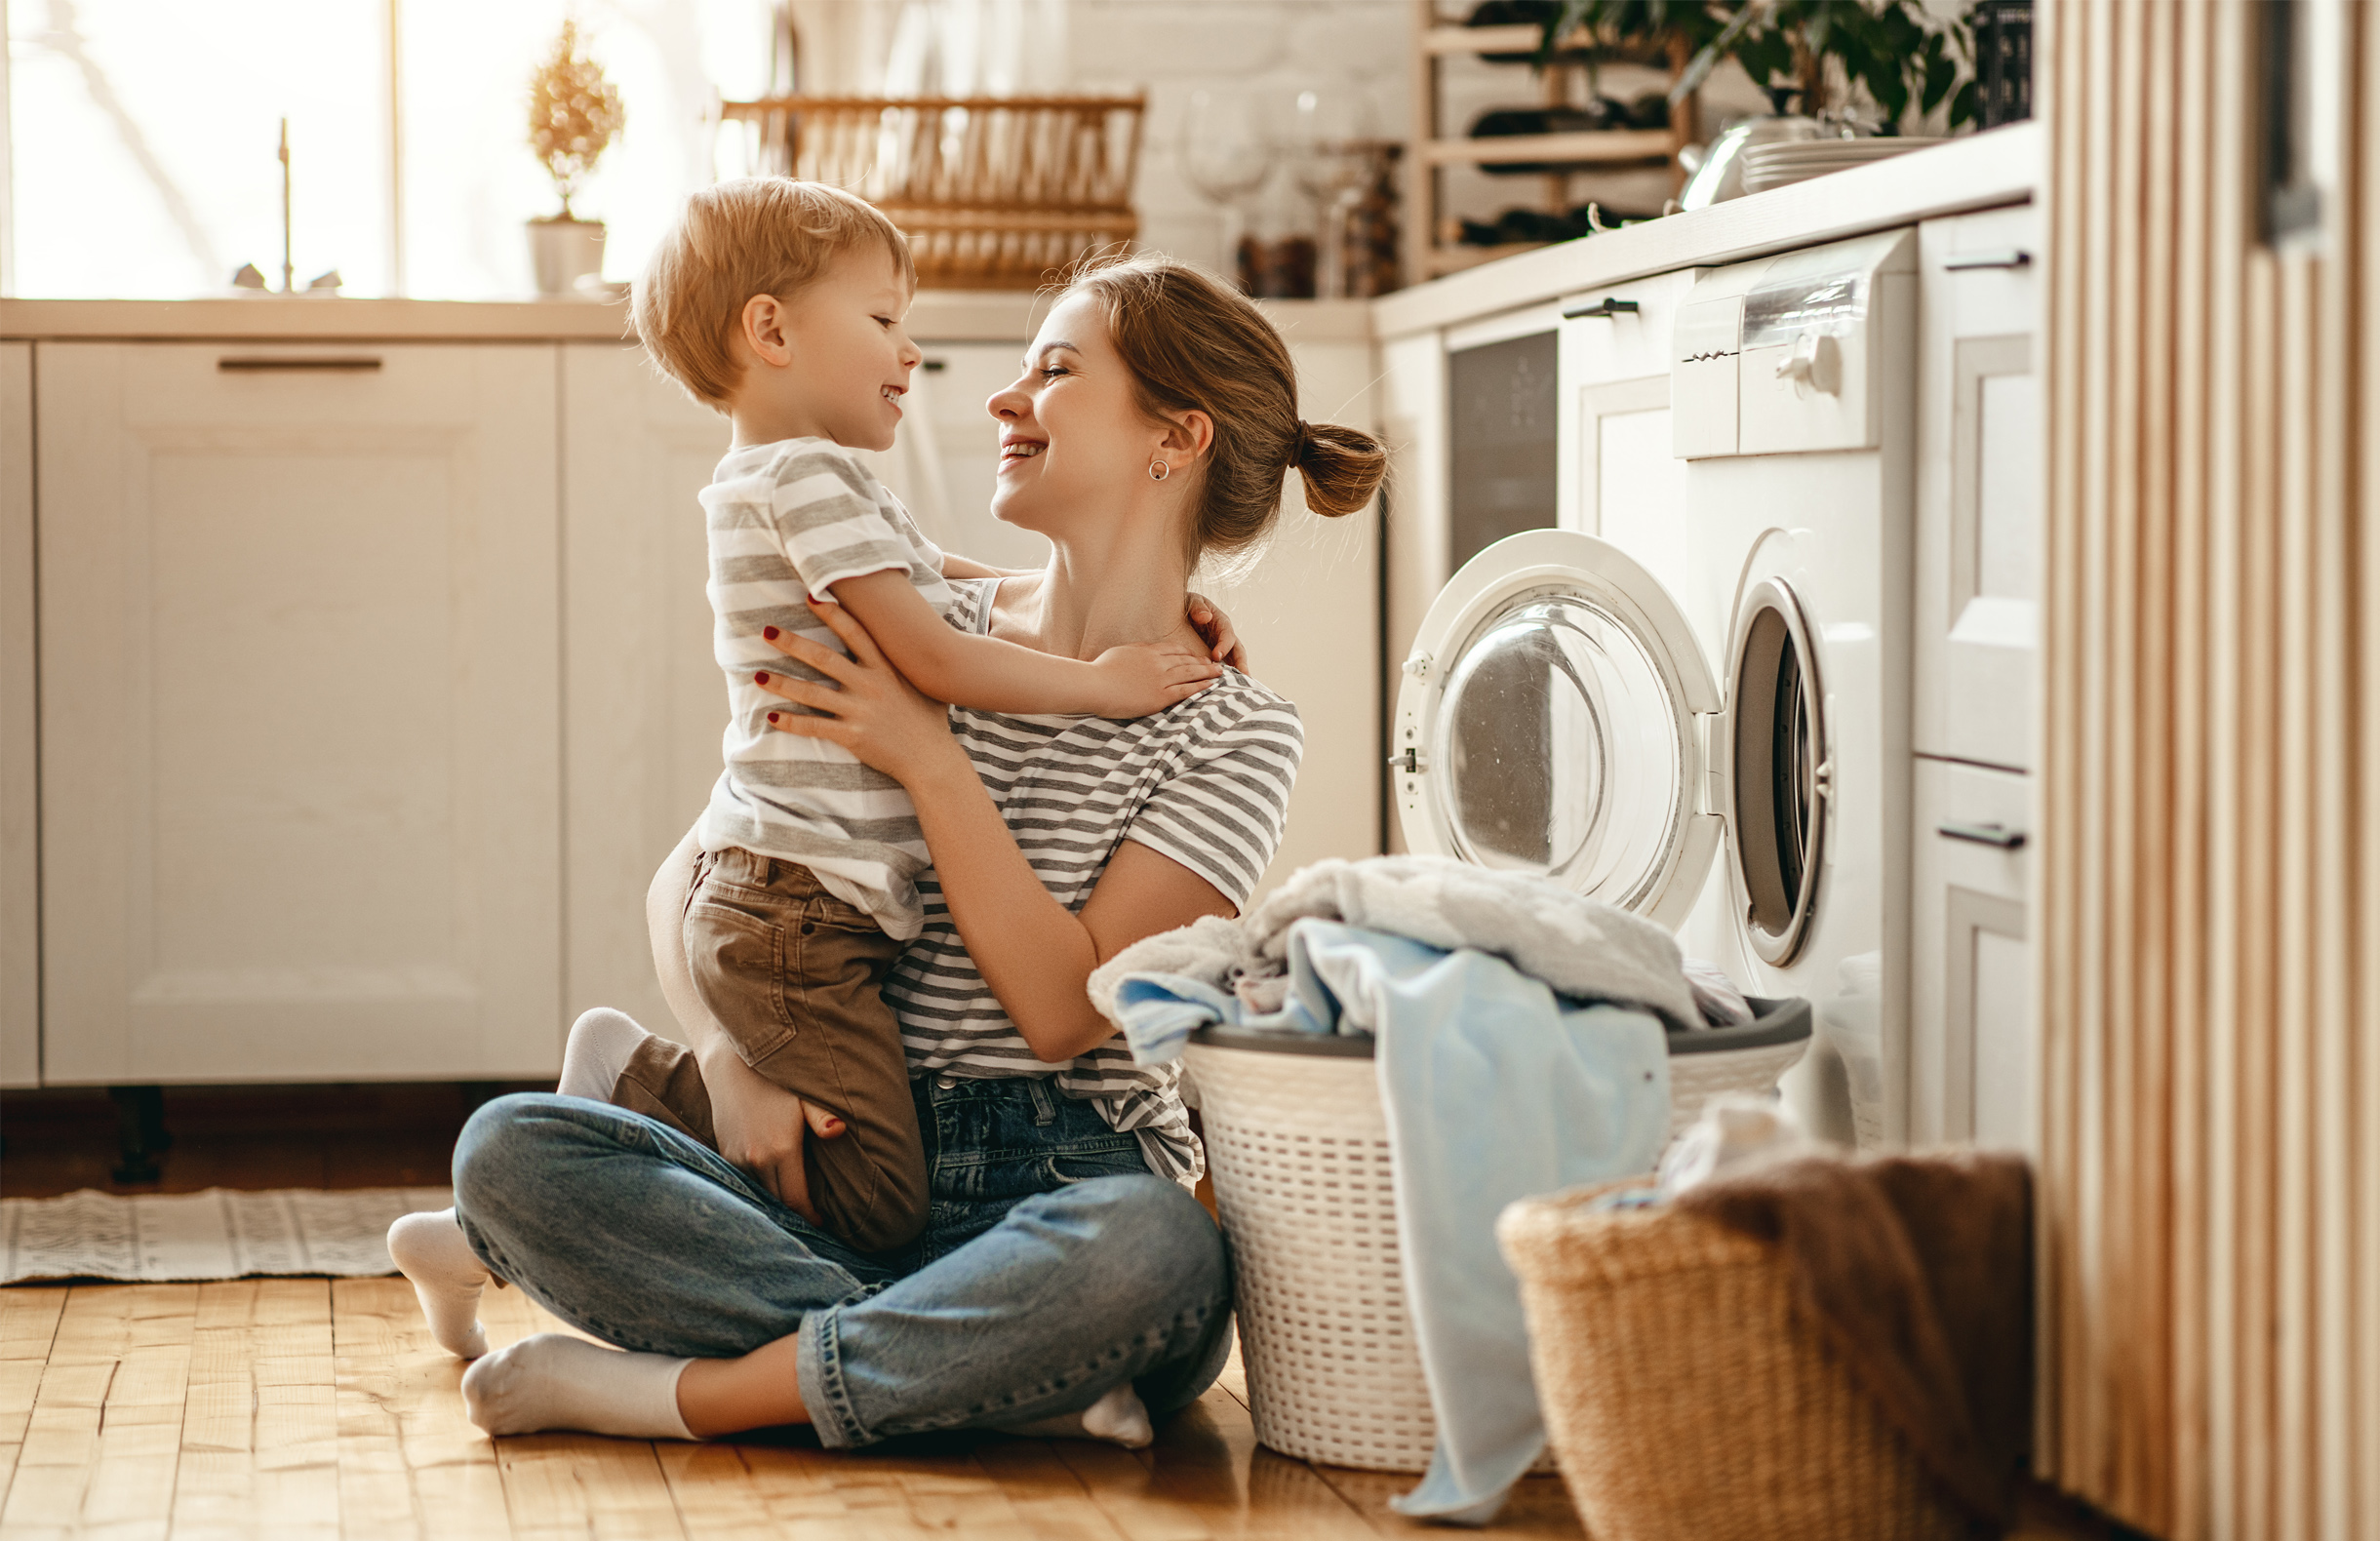 A mother holds her little boy in the laundry room of their home.